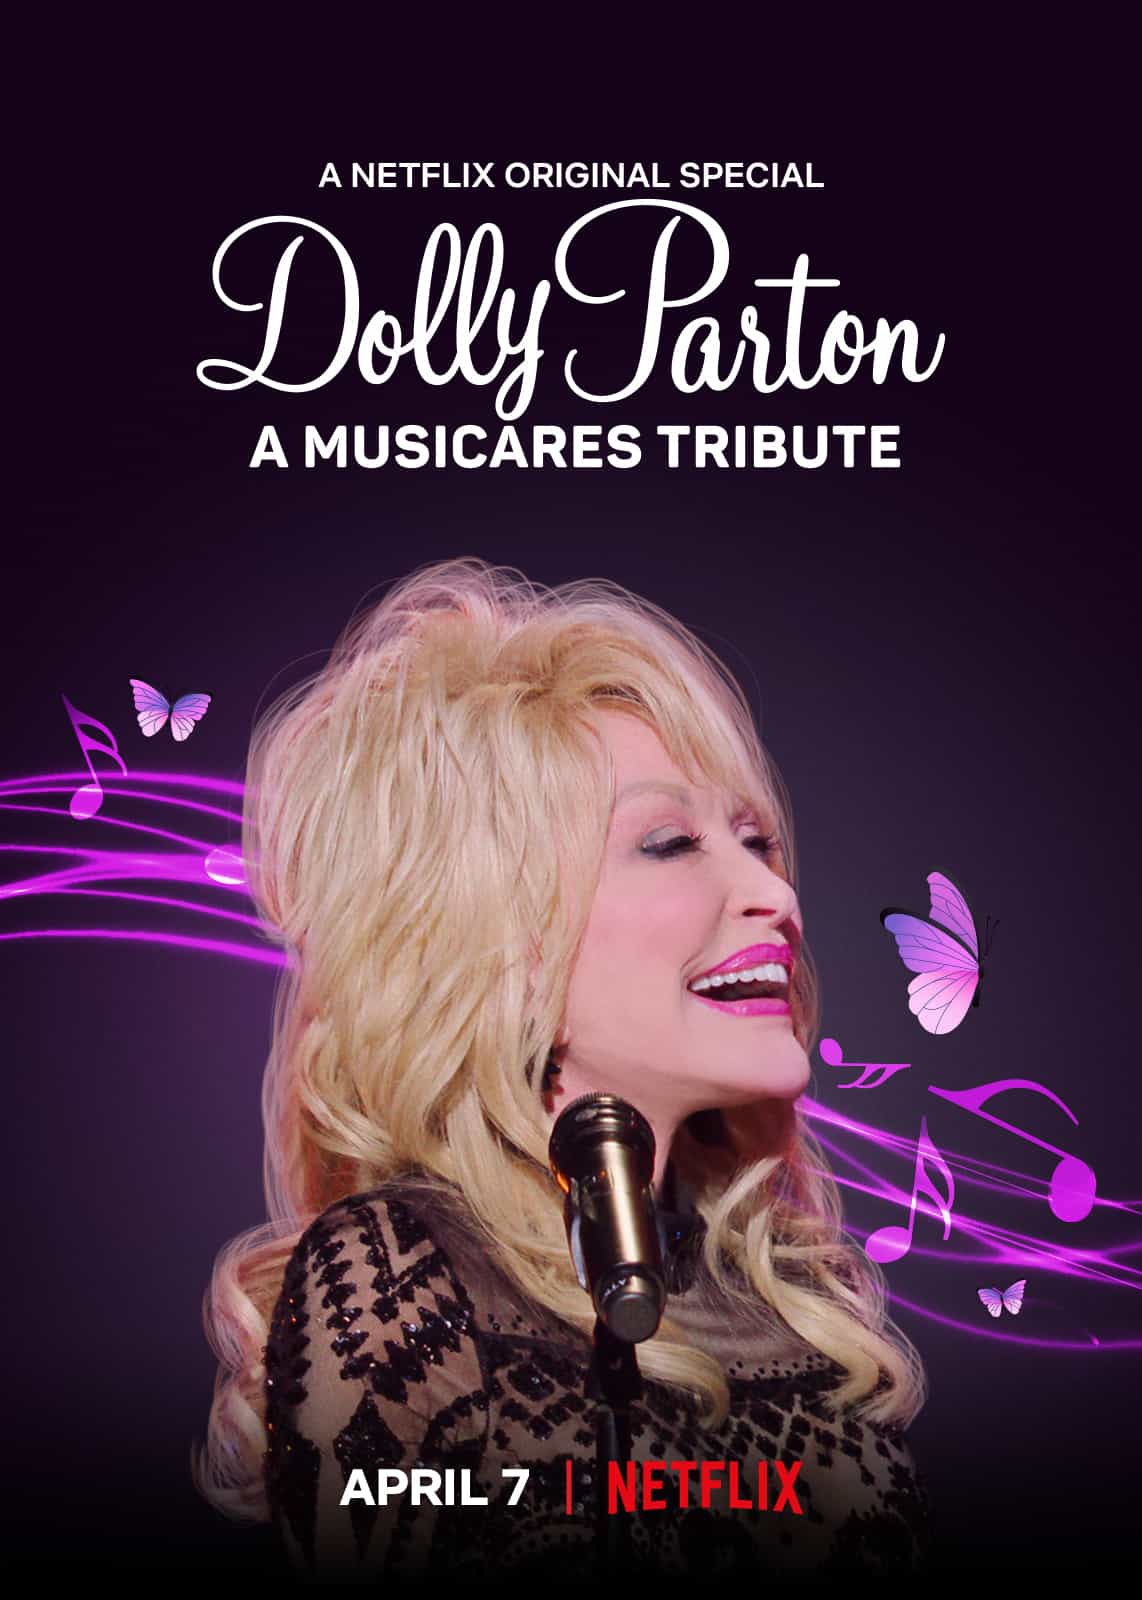 DOLLY PARTON: A MUSICARES TRIBUTE